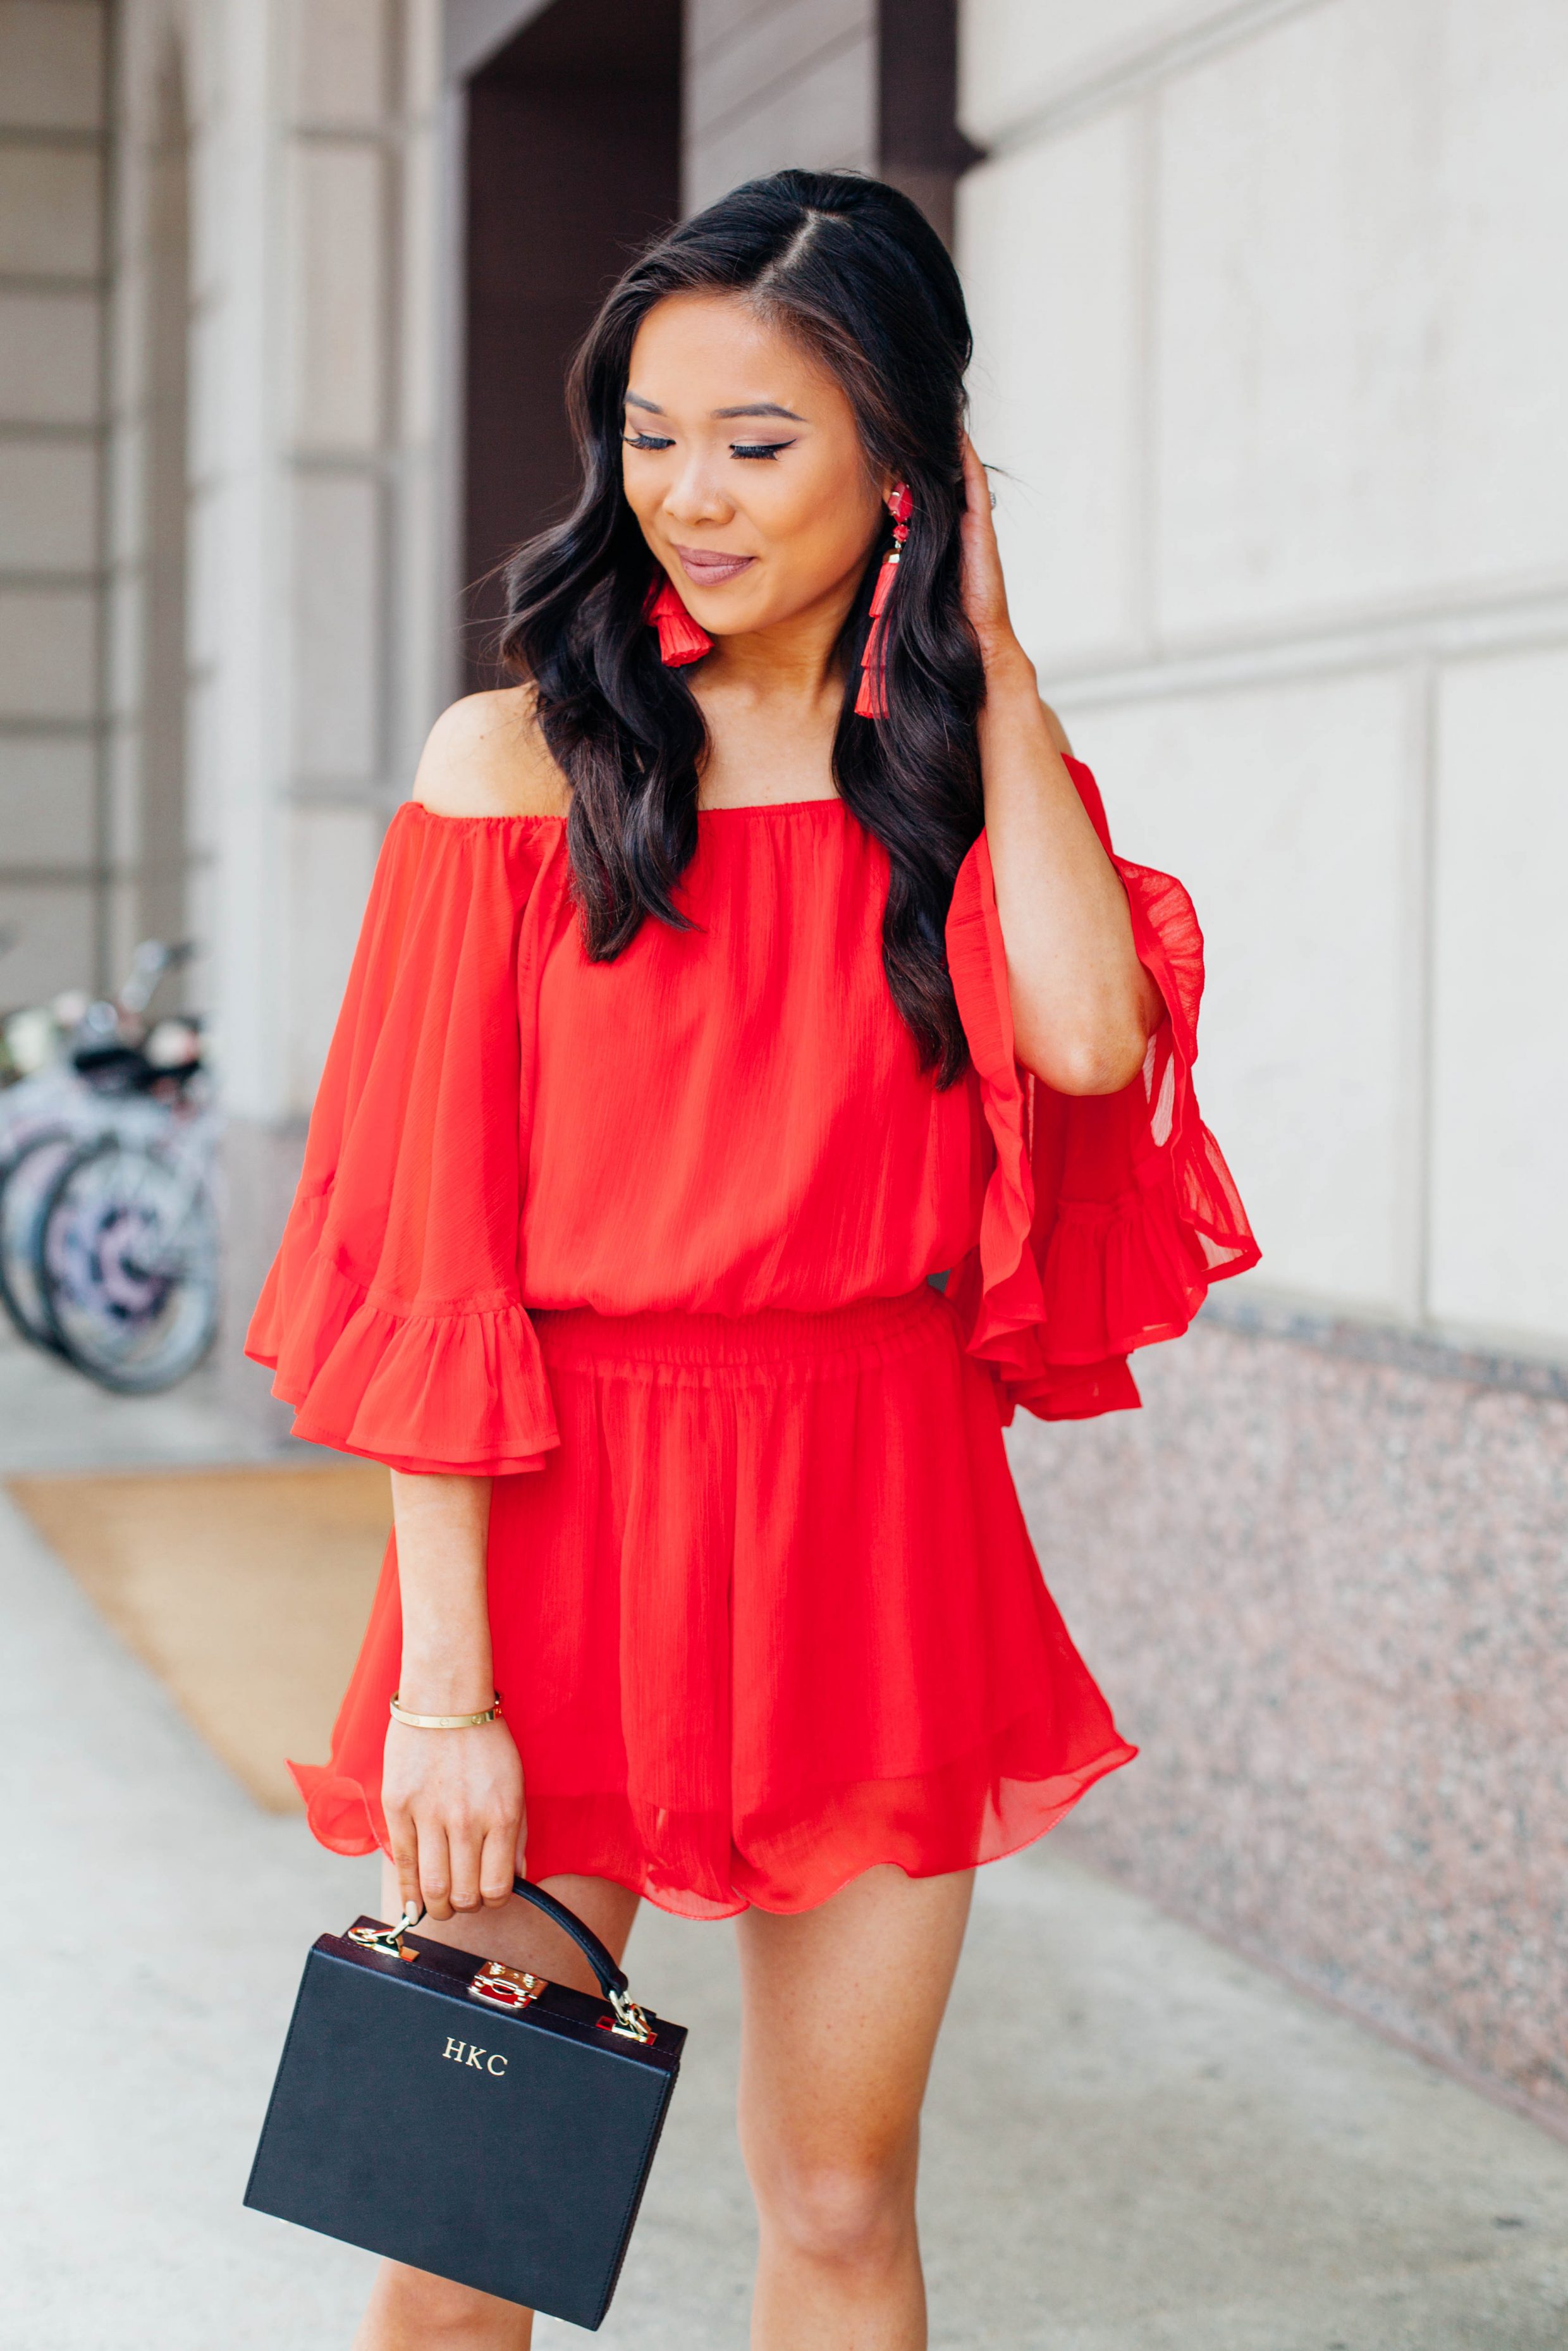 Hoang-Kim wears a red off the shoulder romper with tassel earrings and black box bag